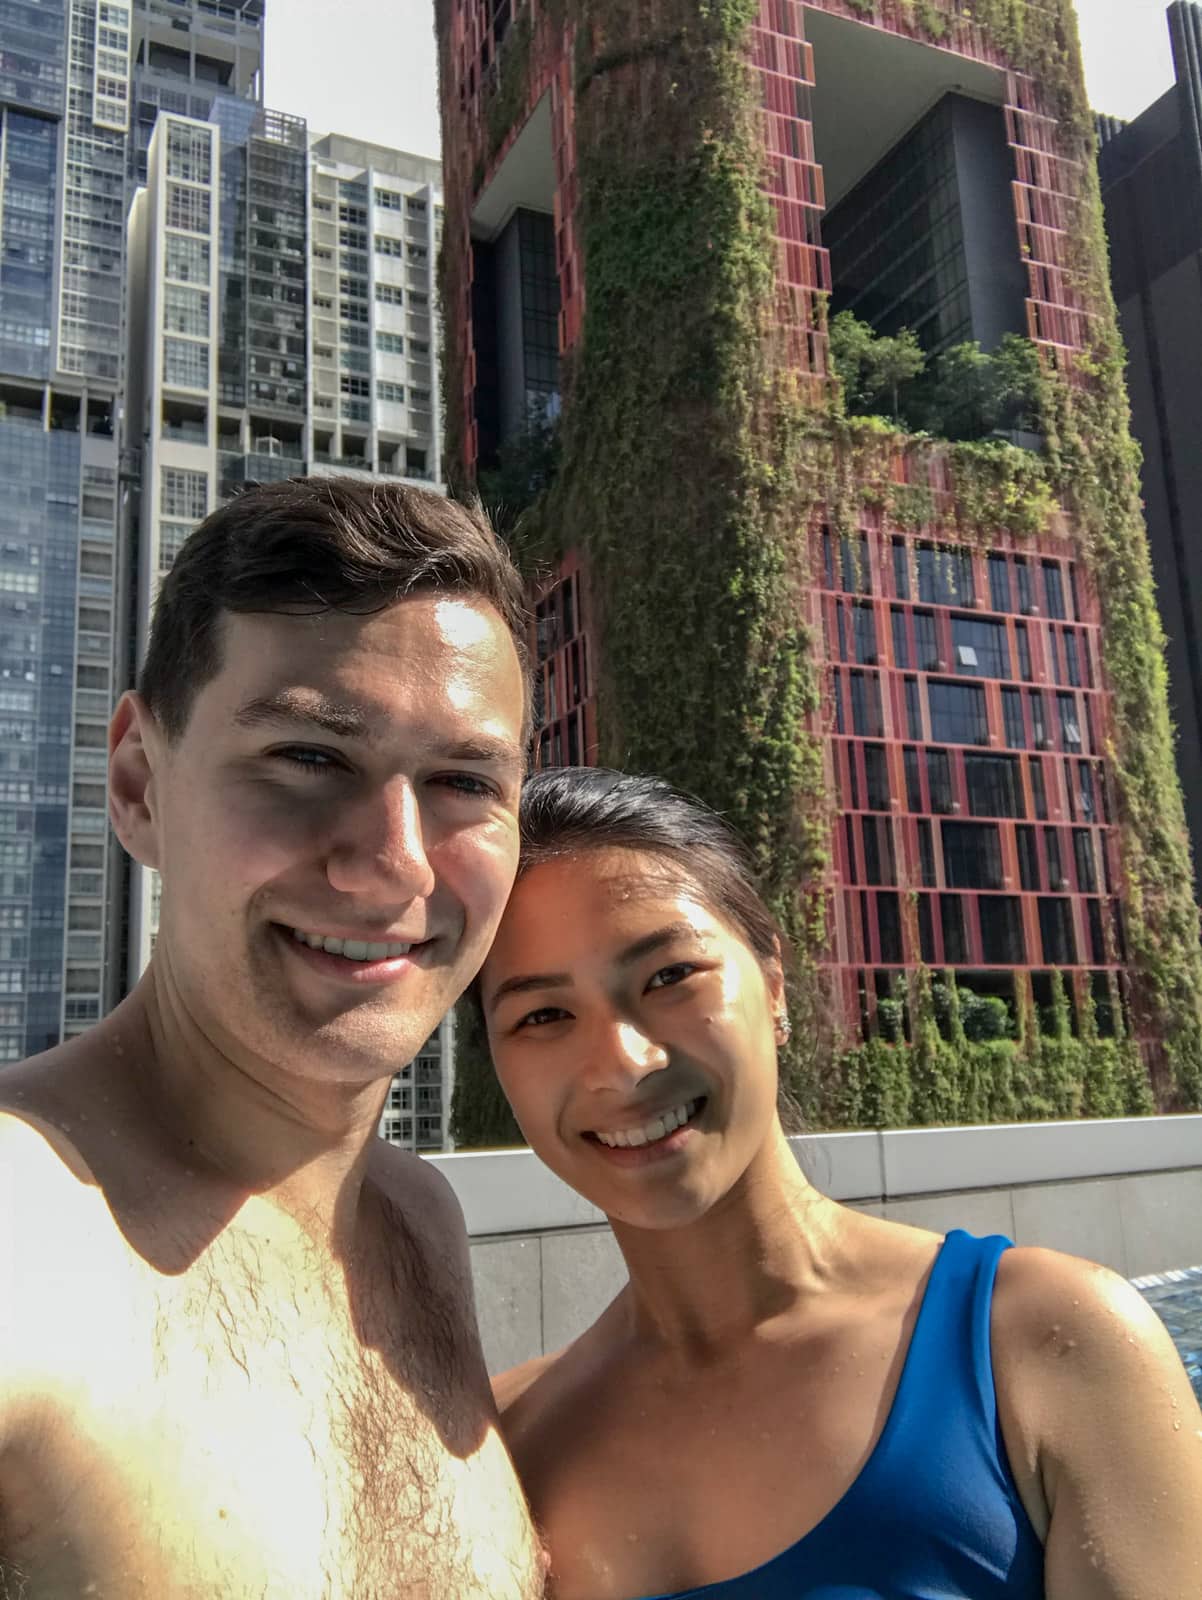 A selfie of a man and woman in a rooftop swimming pool, with a red building behind them that has green plants growing on it. The woman is wearing a bikini top with one strap.